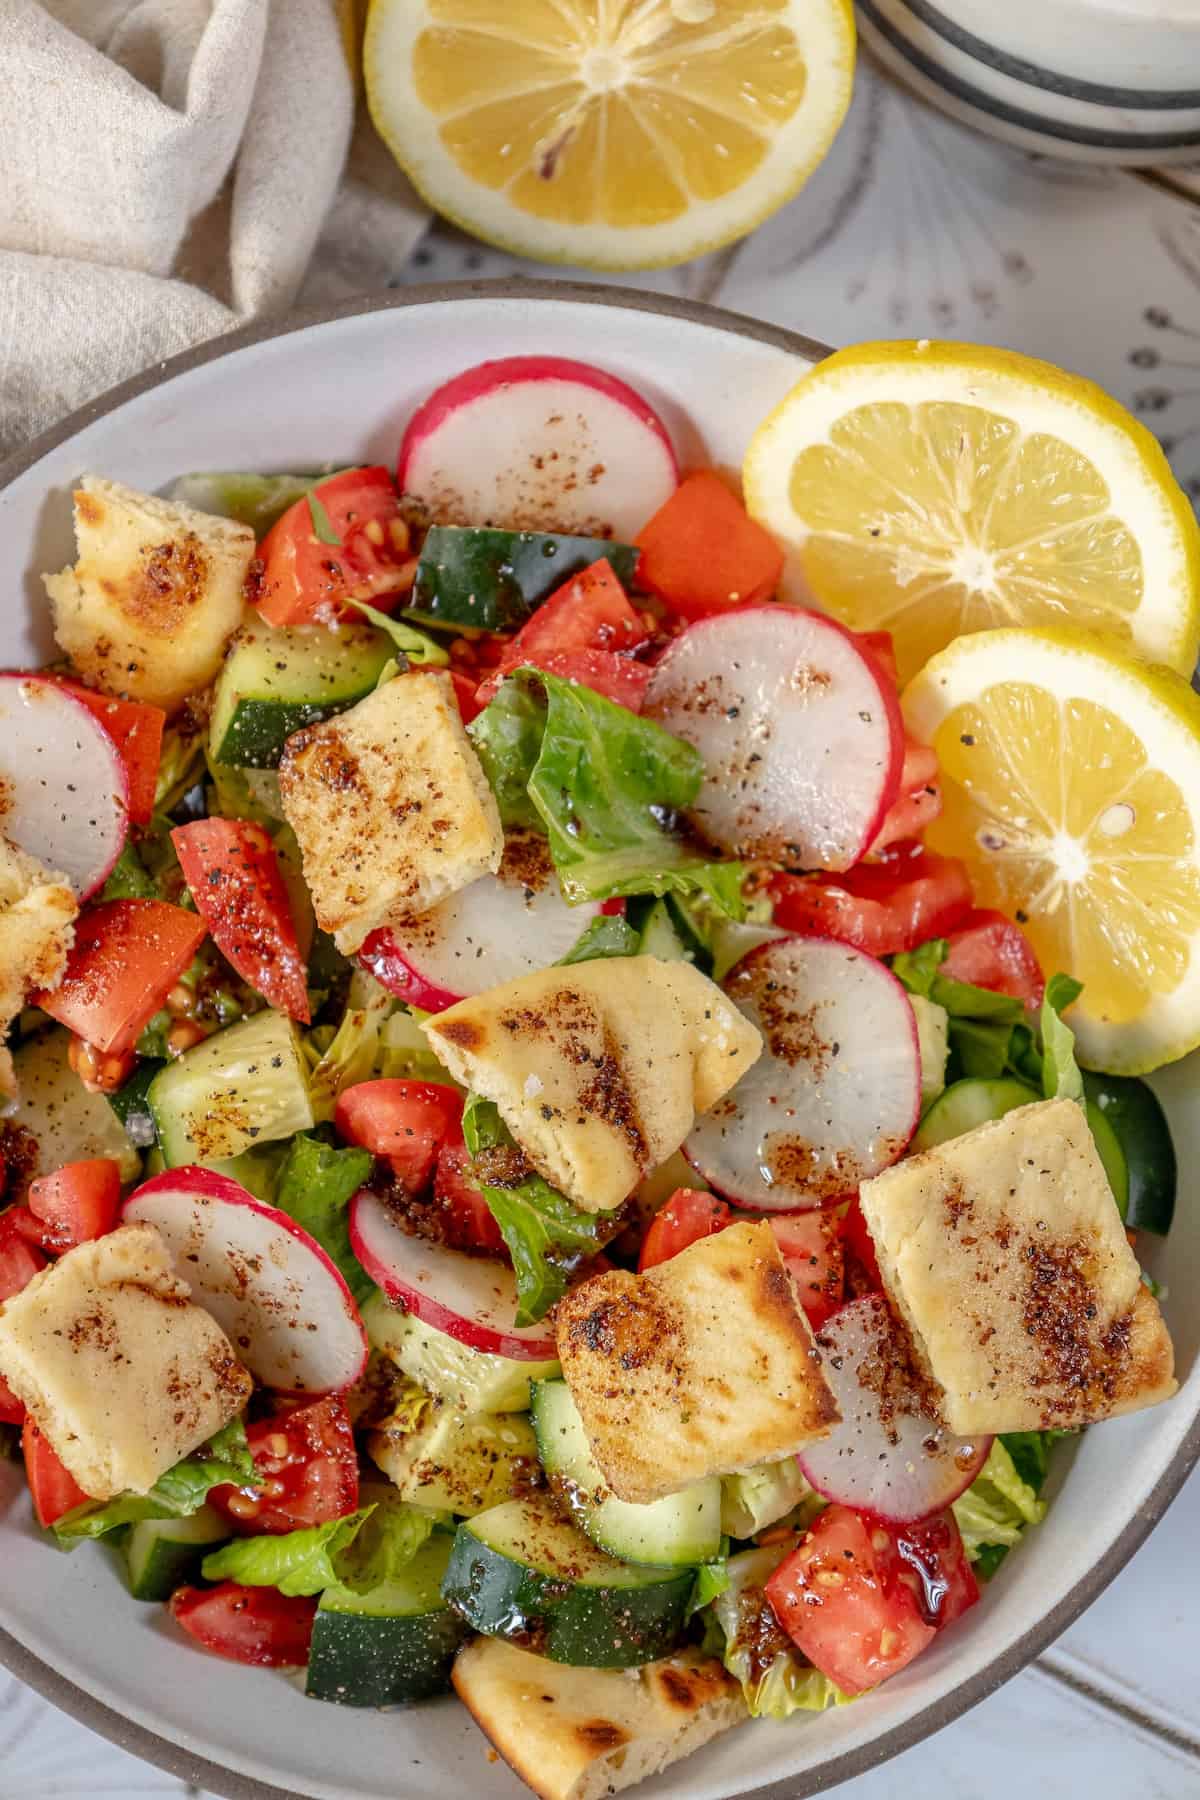 A Fattoush Salad with vegetables and a lemon.